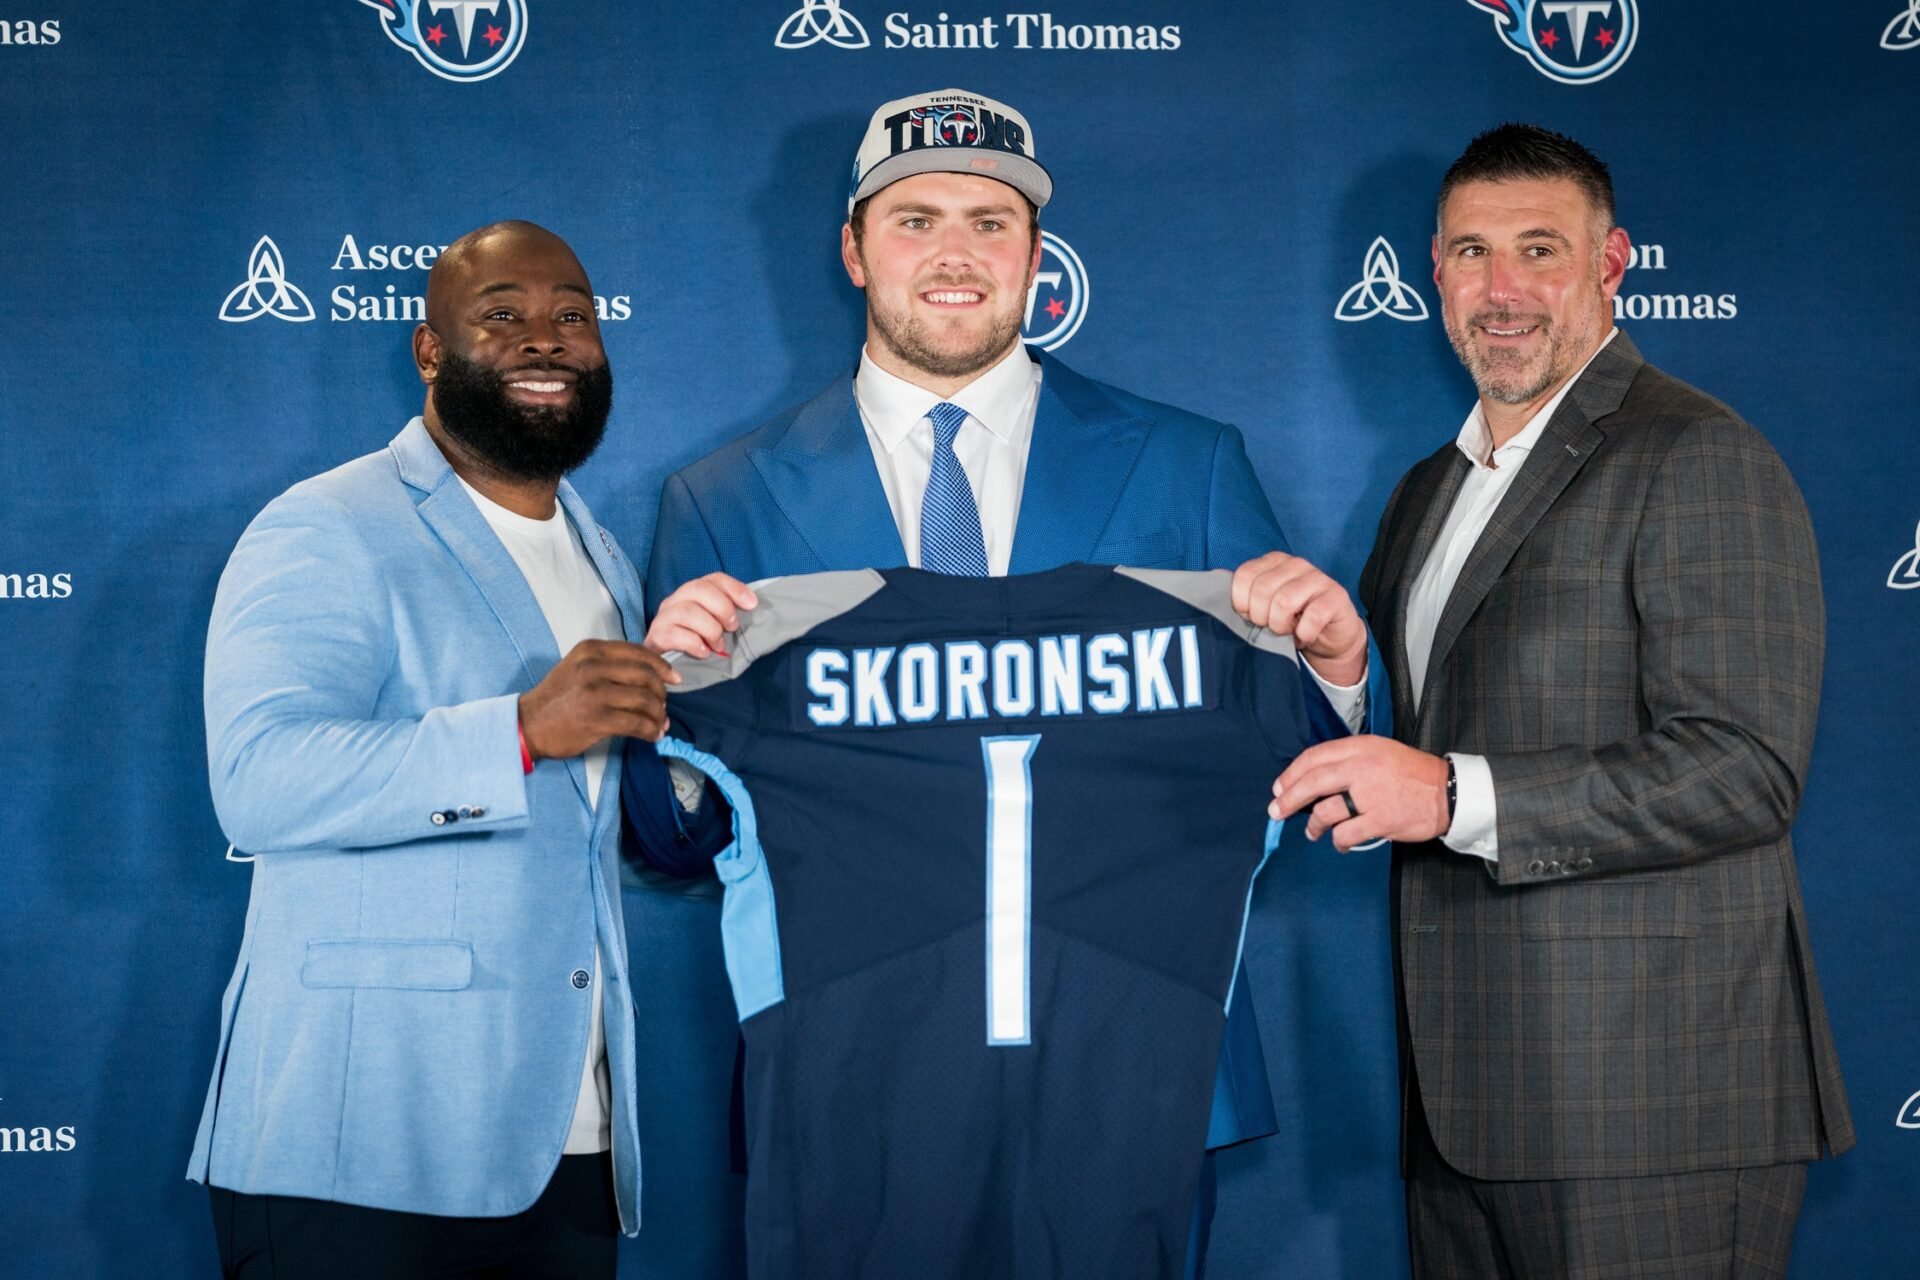 Tennessee Titans first-round draft pick offensive tackle Peter Skoronski, center, poses with general manager Ran Carthon, left, and head coach Mike Vrabel, right, during a press conference at Ascension Saint Thomas Sports Park in Nashville, TN.